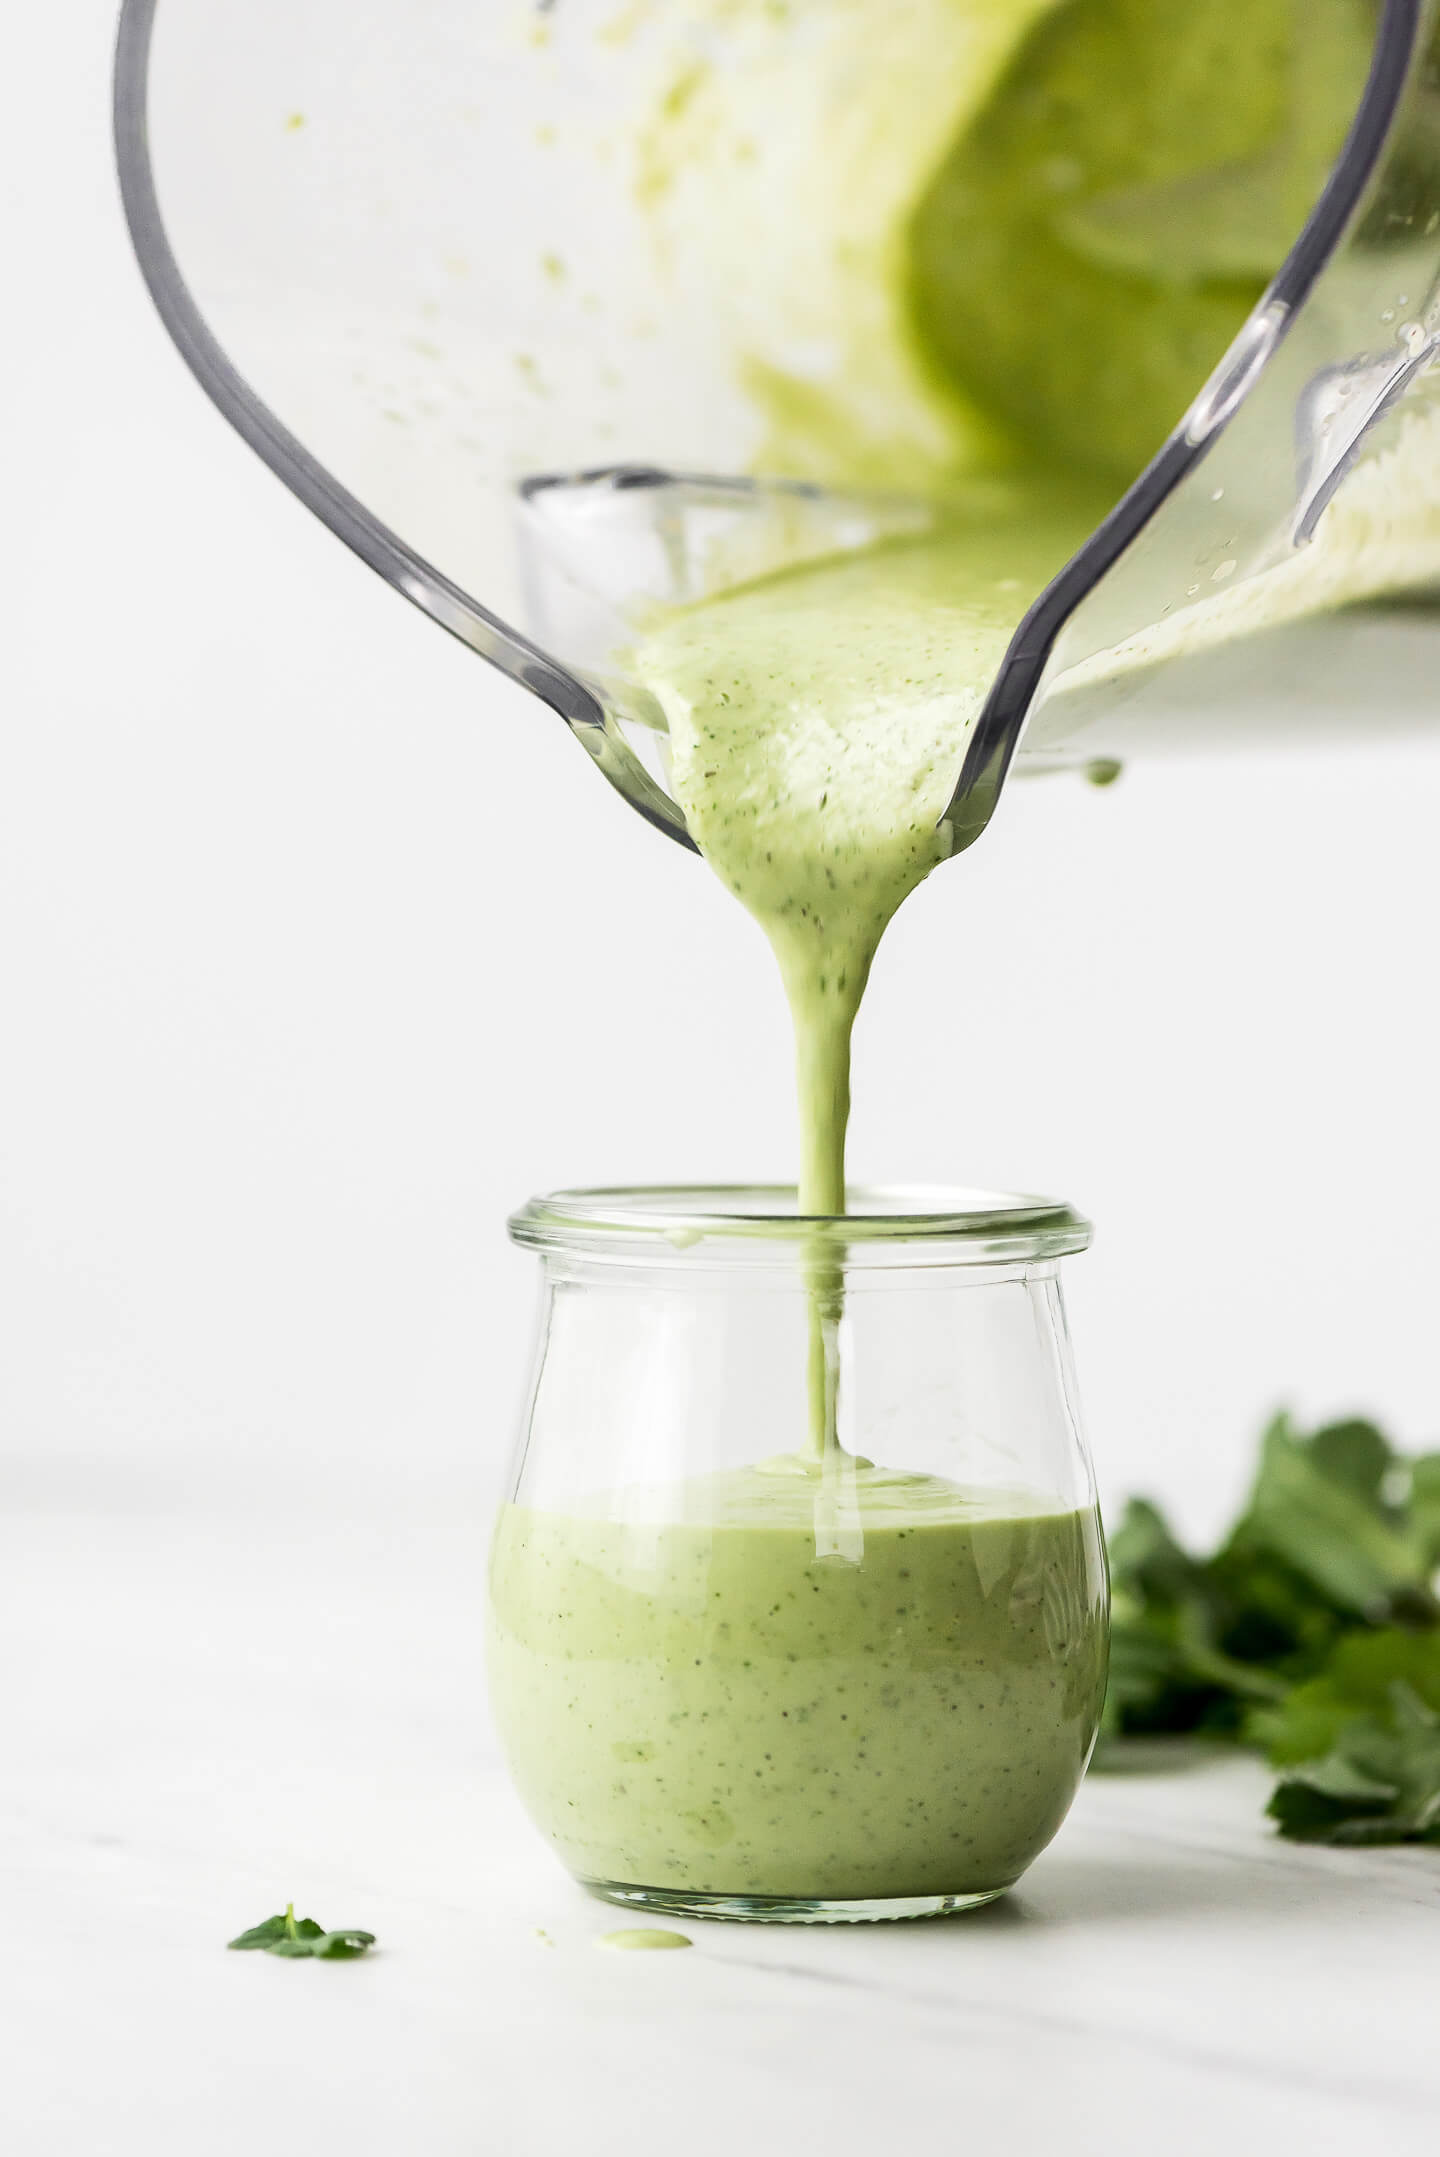 Green dressing being poured from a blender into a small Weck jar.